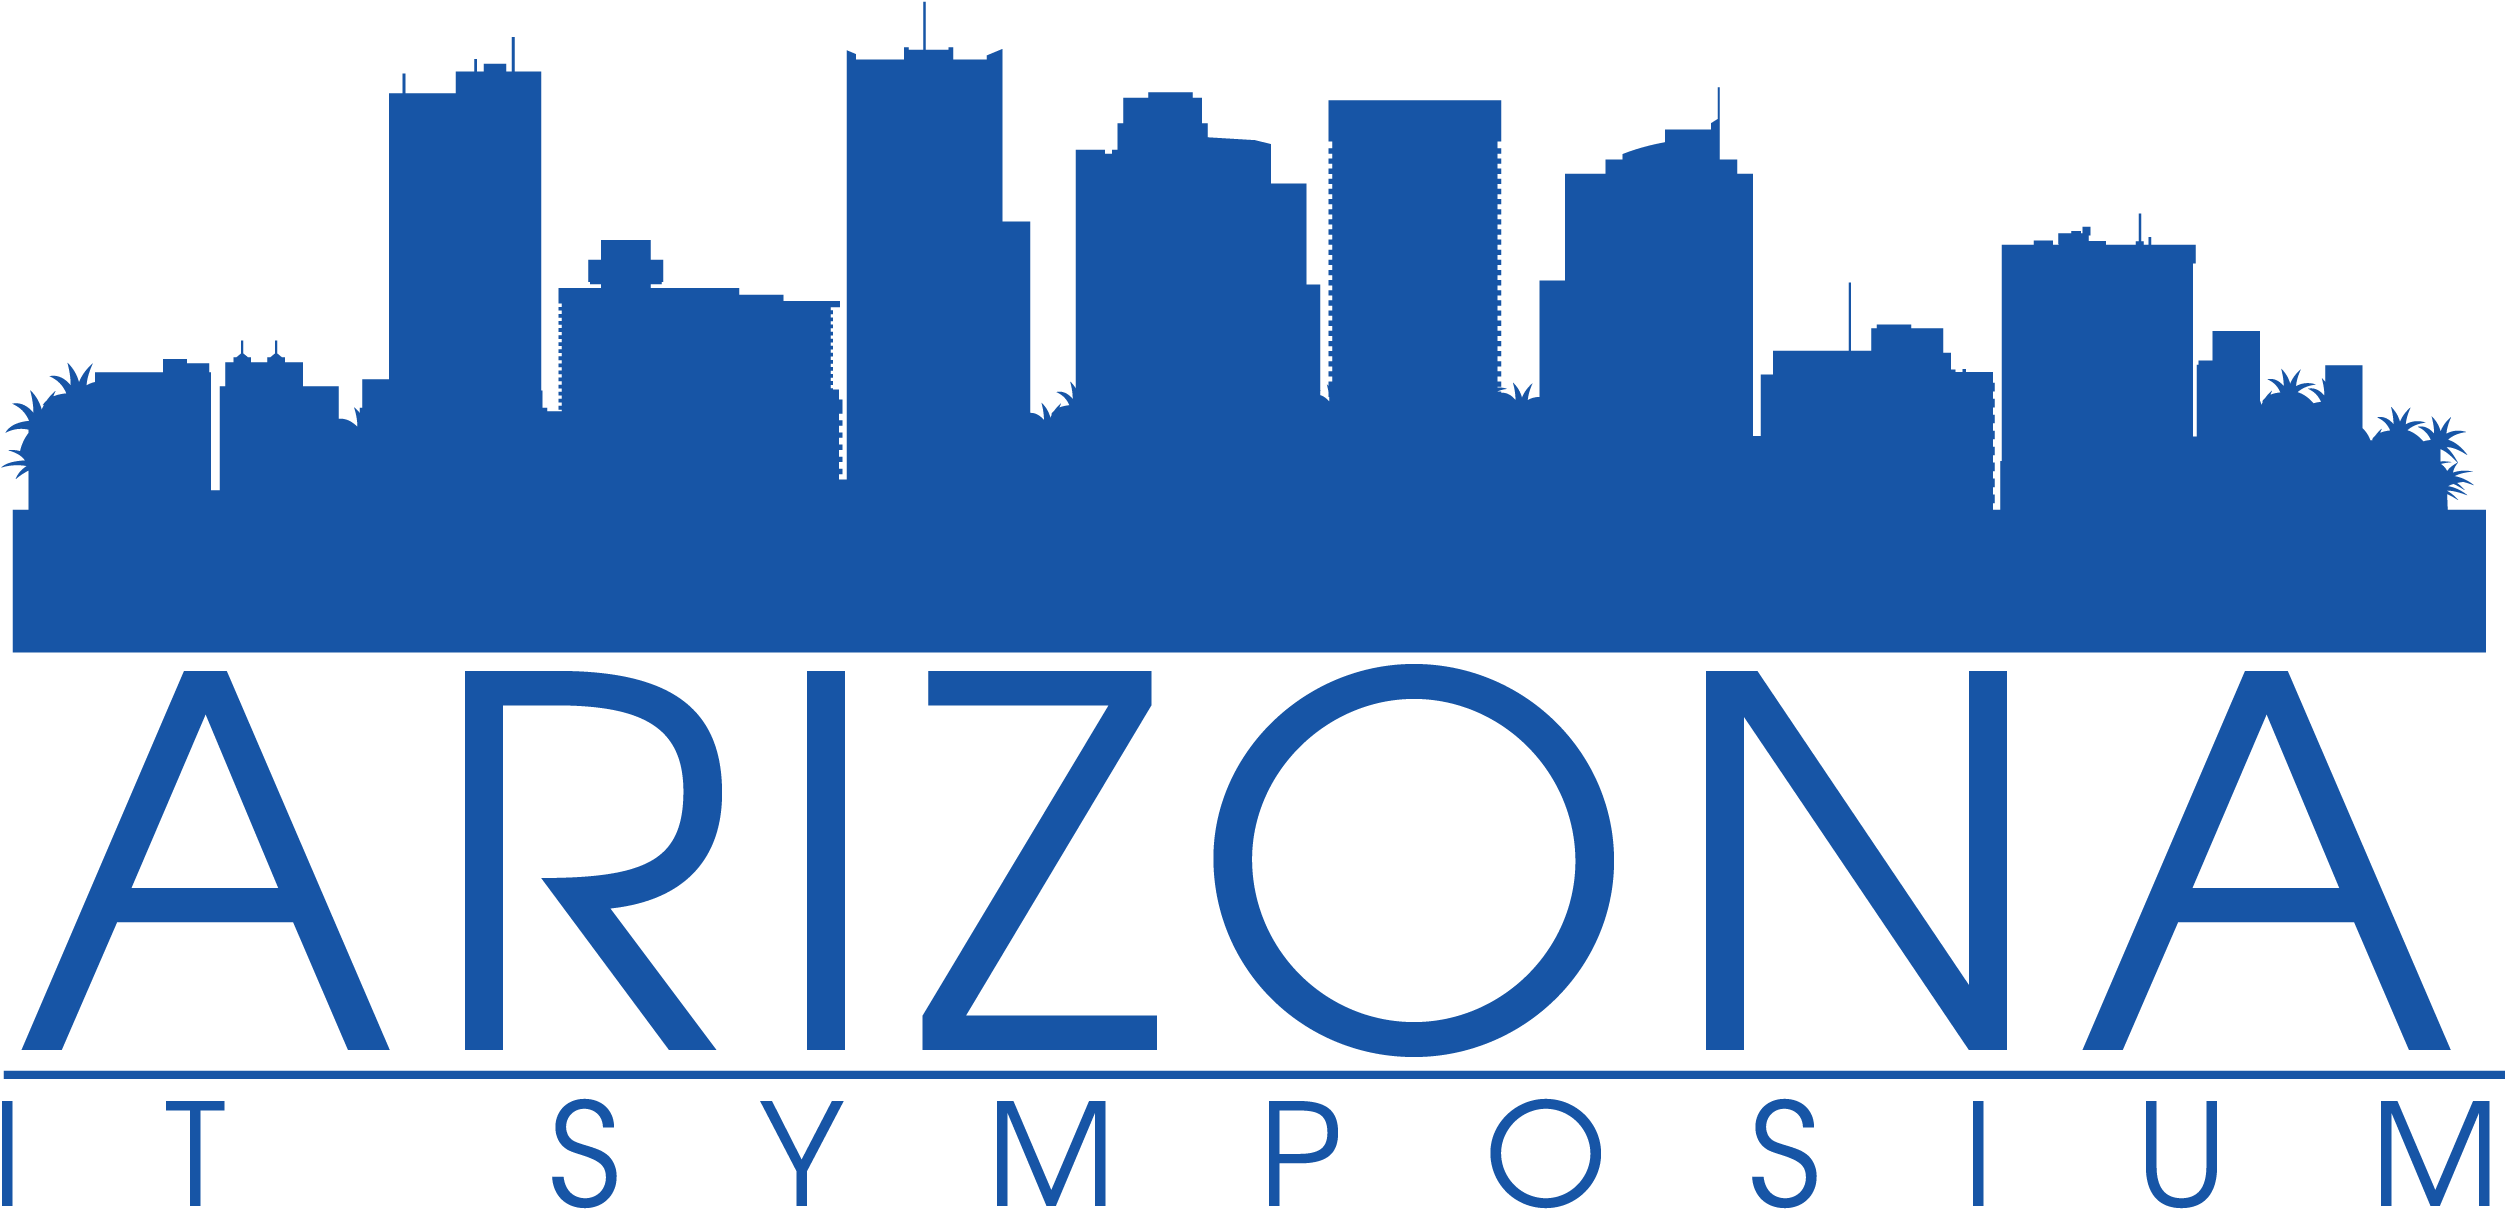 10th Annual Arizona It Symposium To Be Held On April - 10th Annual Arizona It Symposium To Be Held On April (2522x1248)